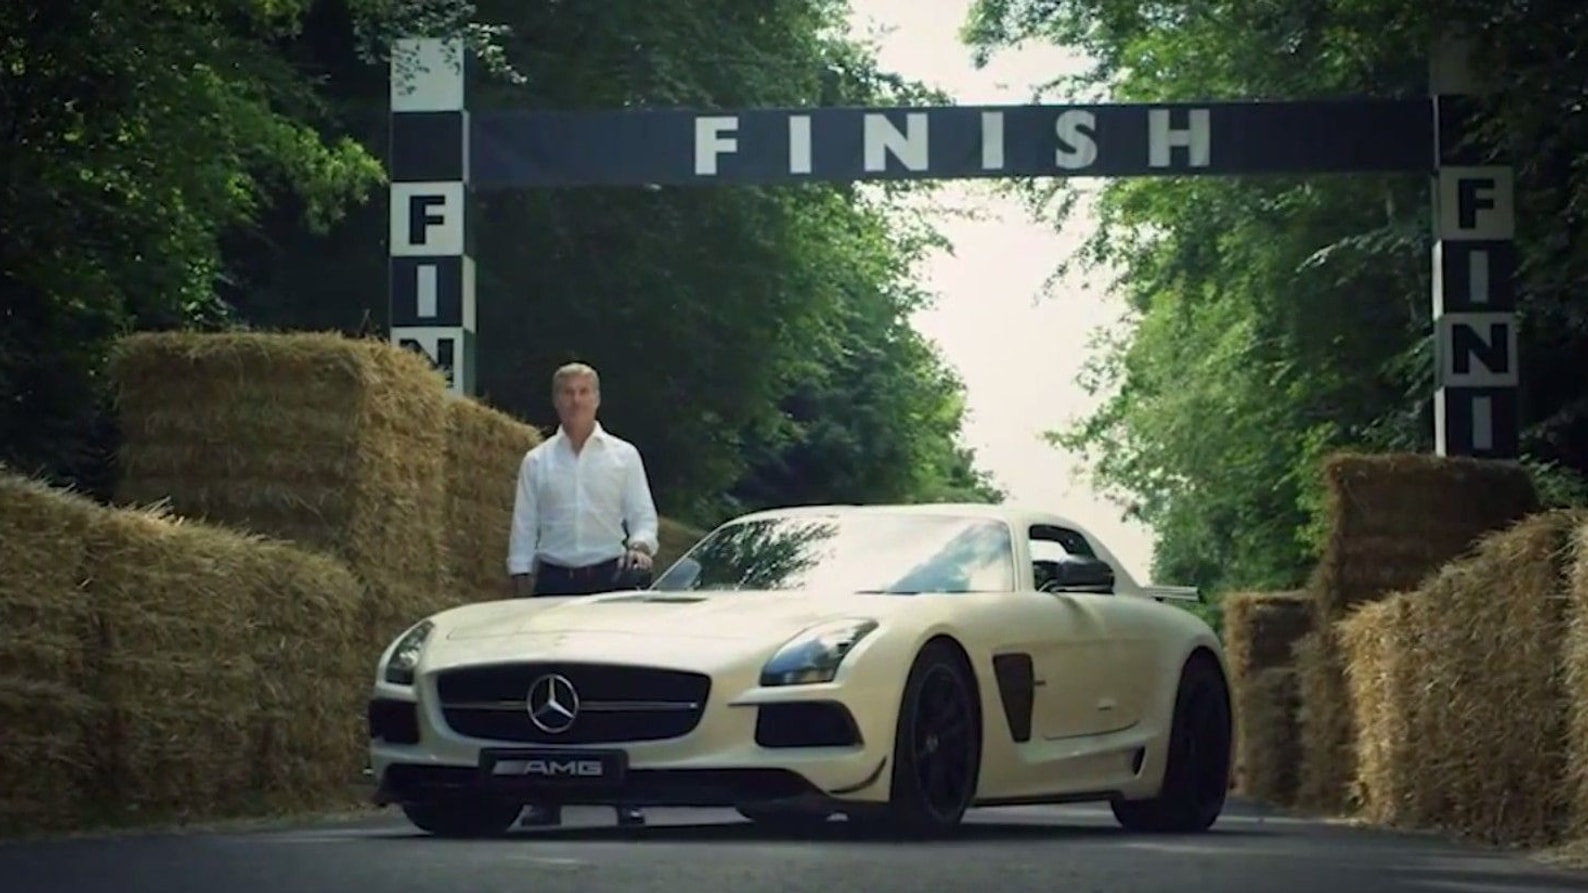 David Coulthard walks us through the hill climb at the Goodwood Festival of Speed